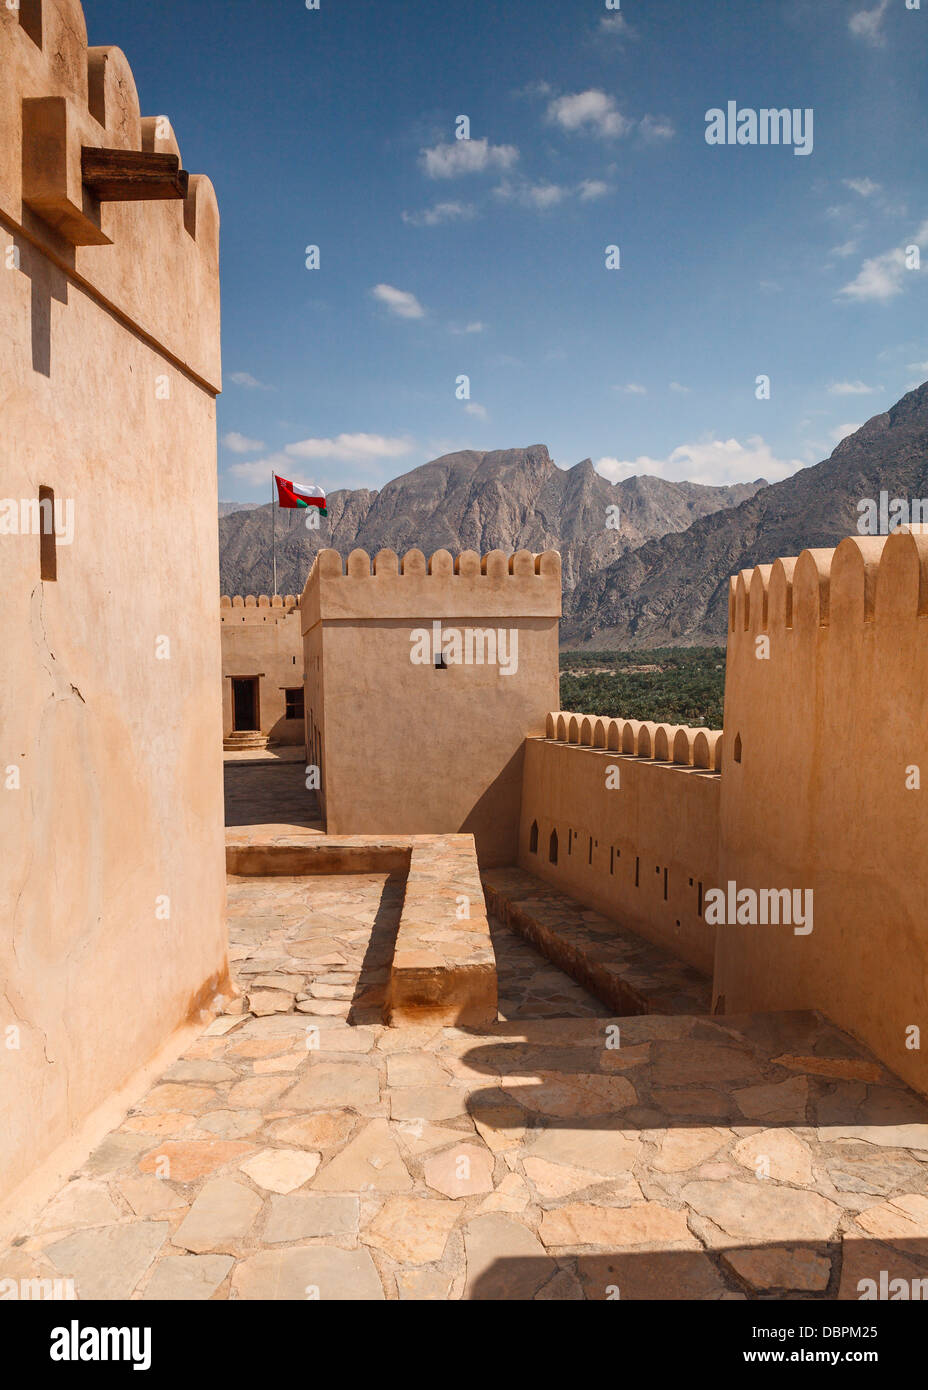 Inside the walls of the restored fort of Nakhal in the Western Hajar mountains of Oman, Middle East Stock Photo